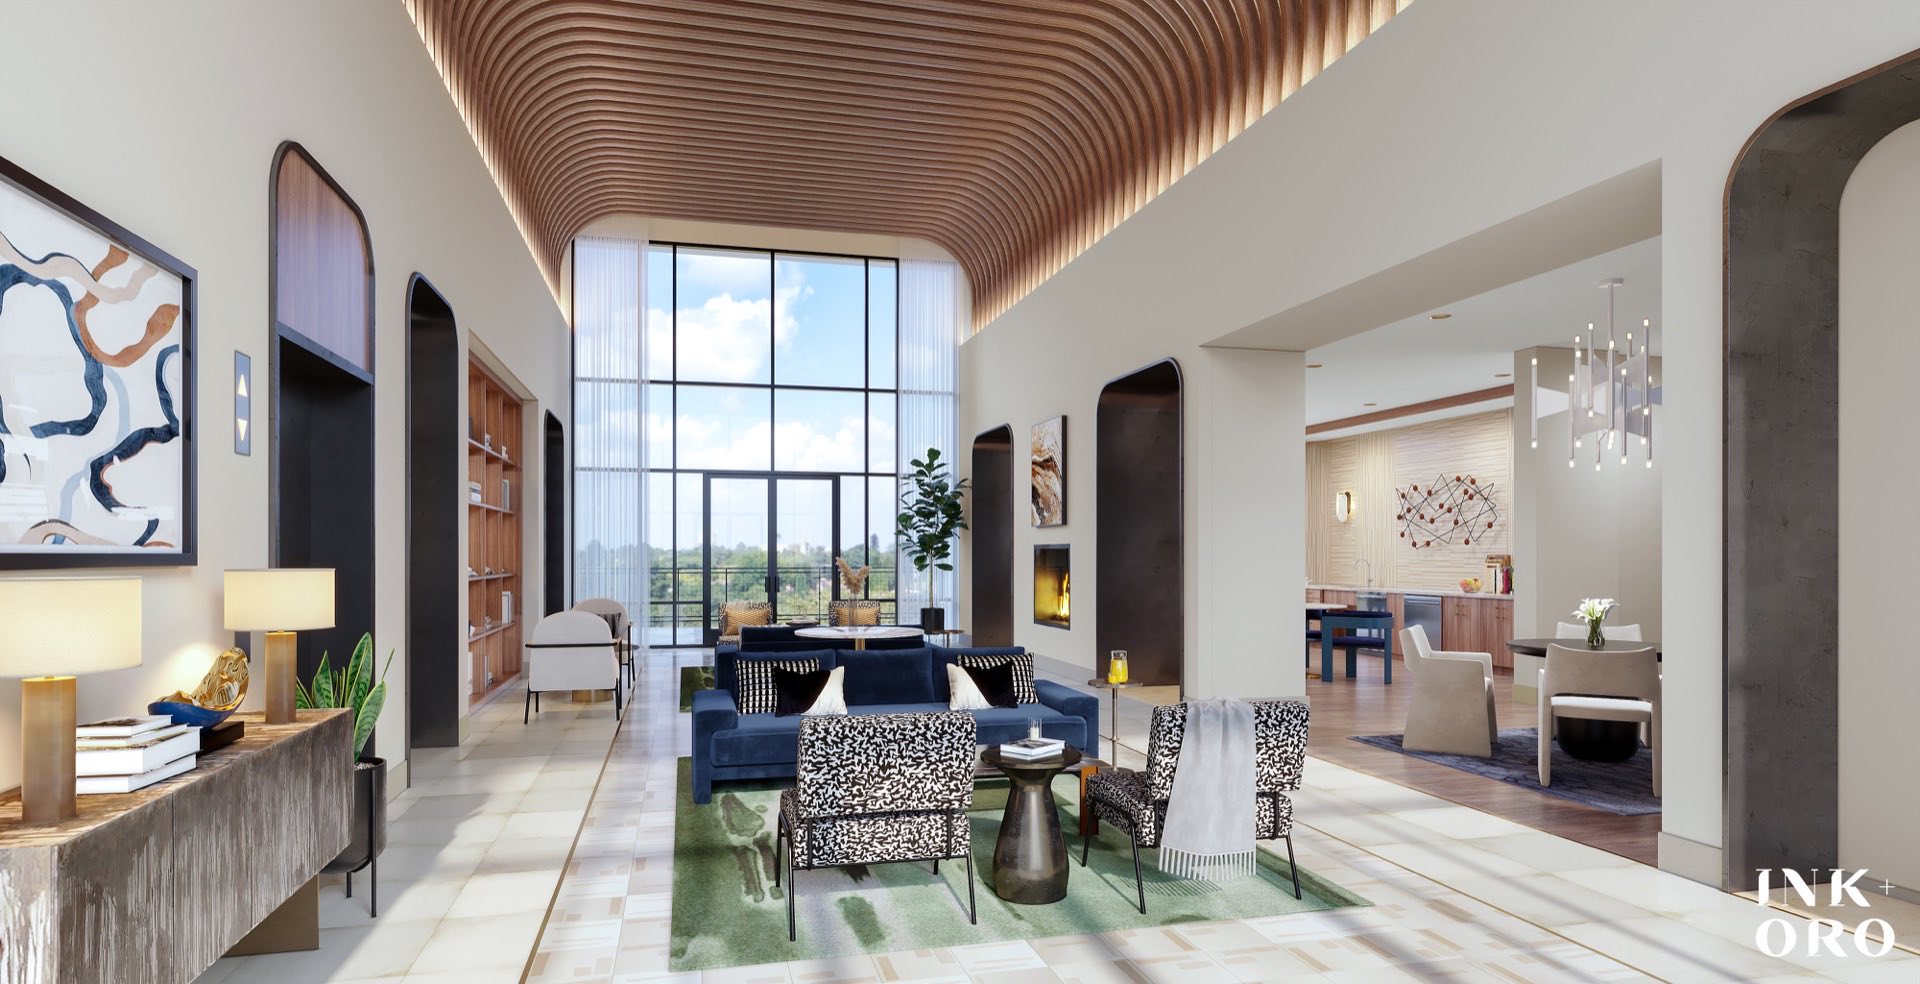 main lobby with floor to ceiling windows and lounge seating with designer furniture